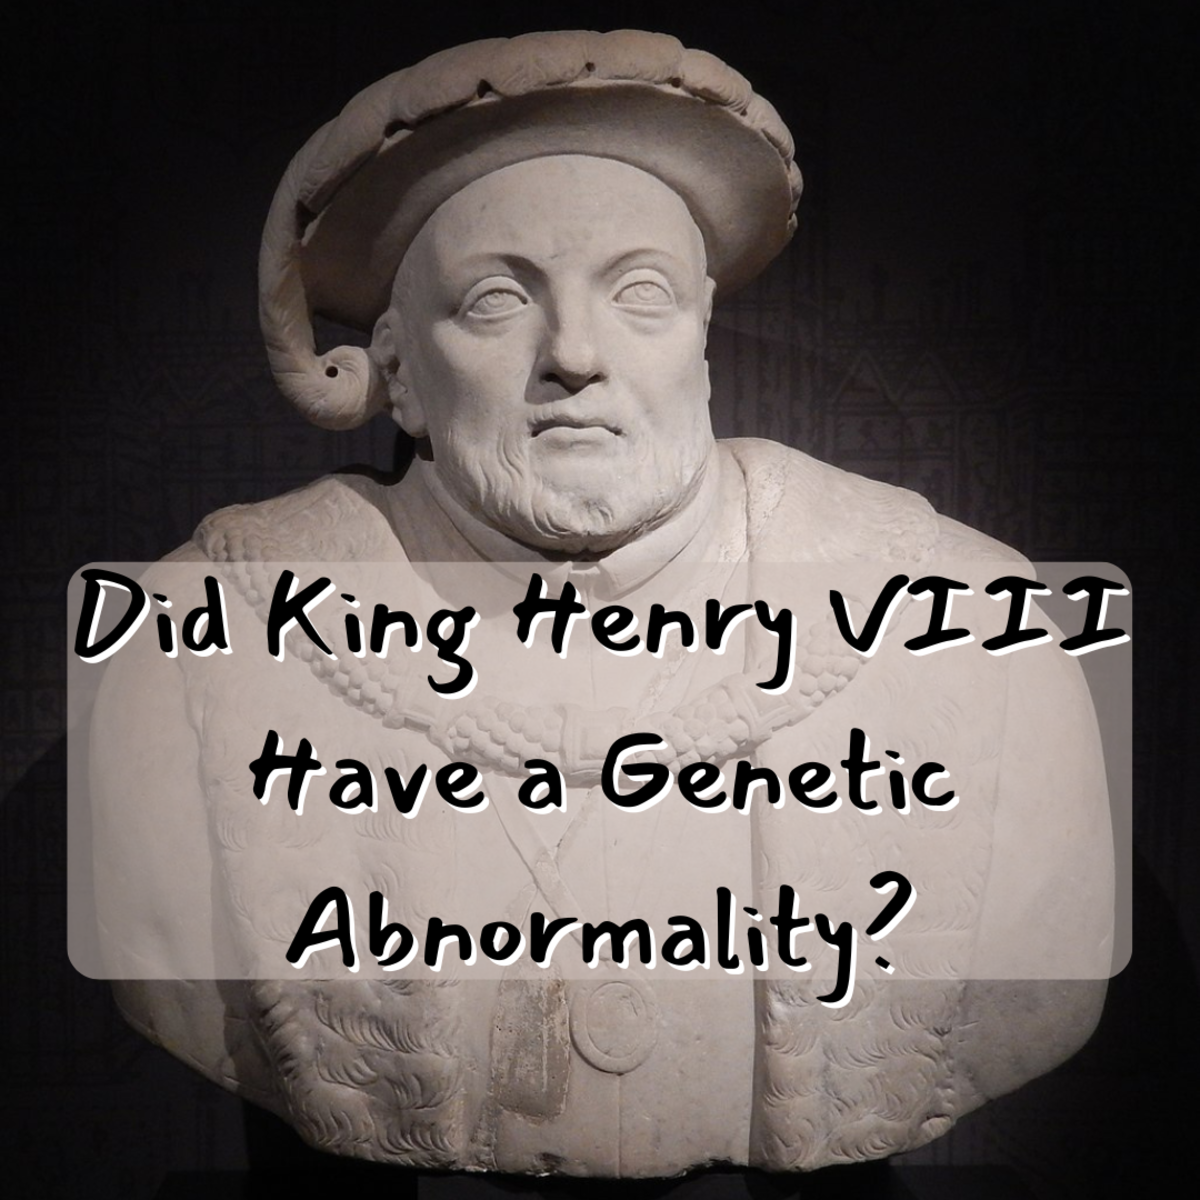 Some historians have proposed theories about King Henry VIII's infamous behavior. Is it possible he had a genetic abnormality that greatly contributed to his deteriorating mental health? Read on to learn more!